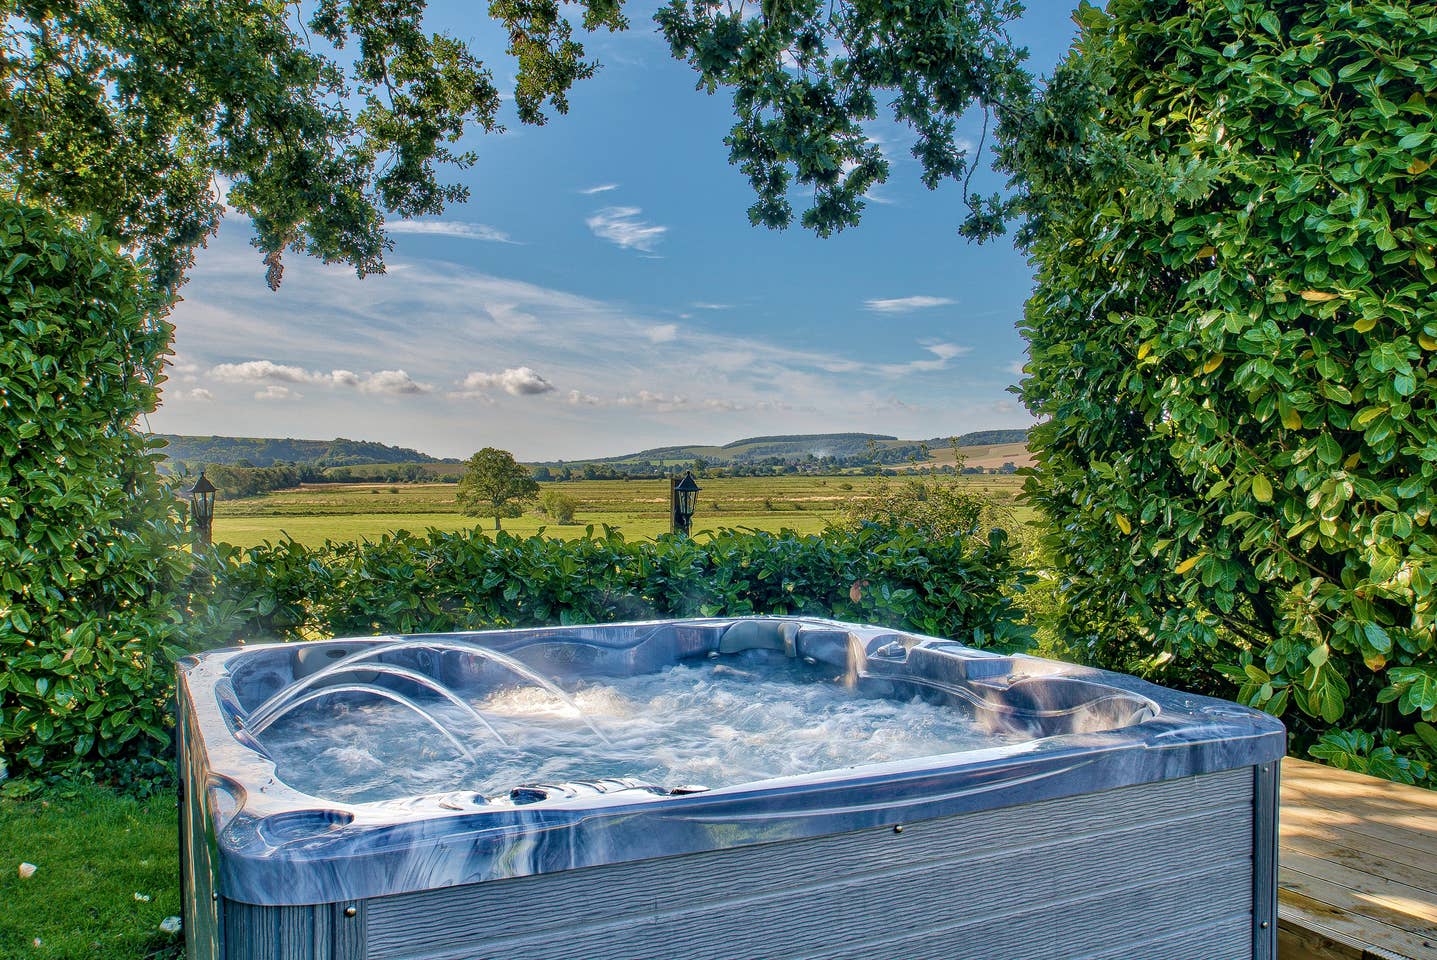 Group Accommodation West Sussex with Hot Tub